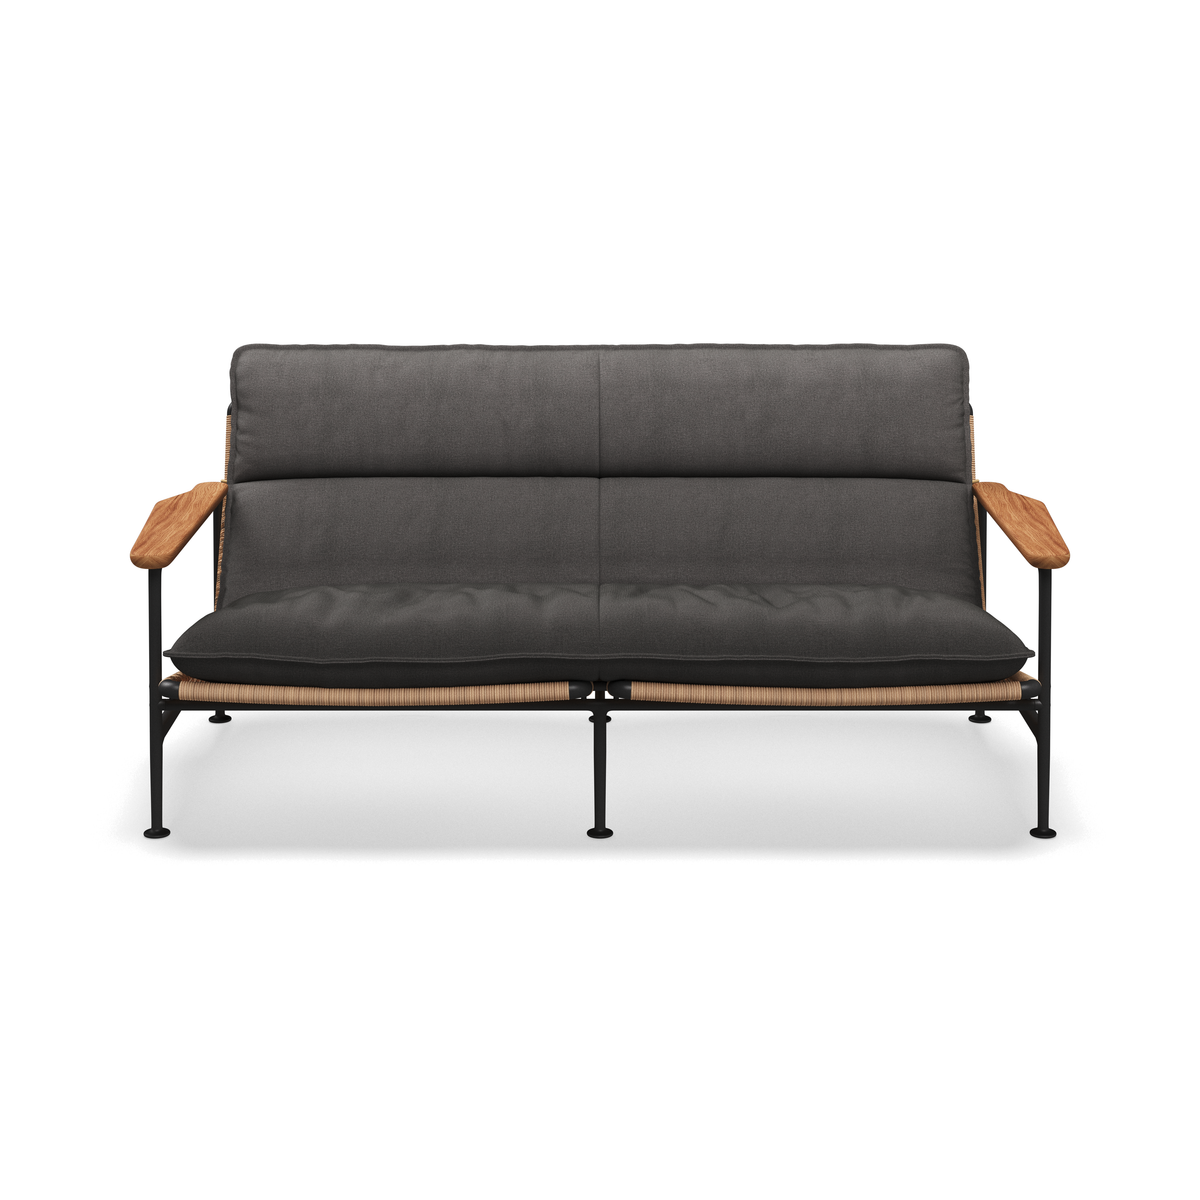 Zenith 2-Seater Sofa-Gloster-Contract Furniture Store